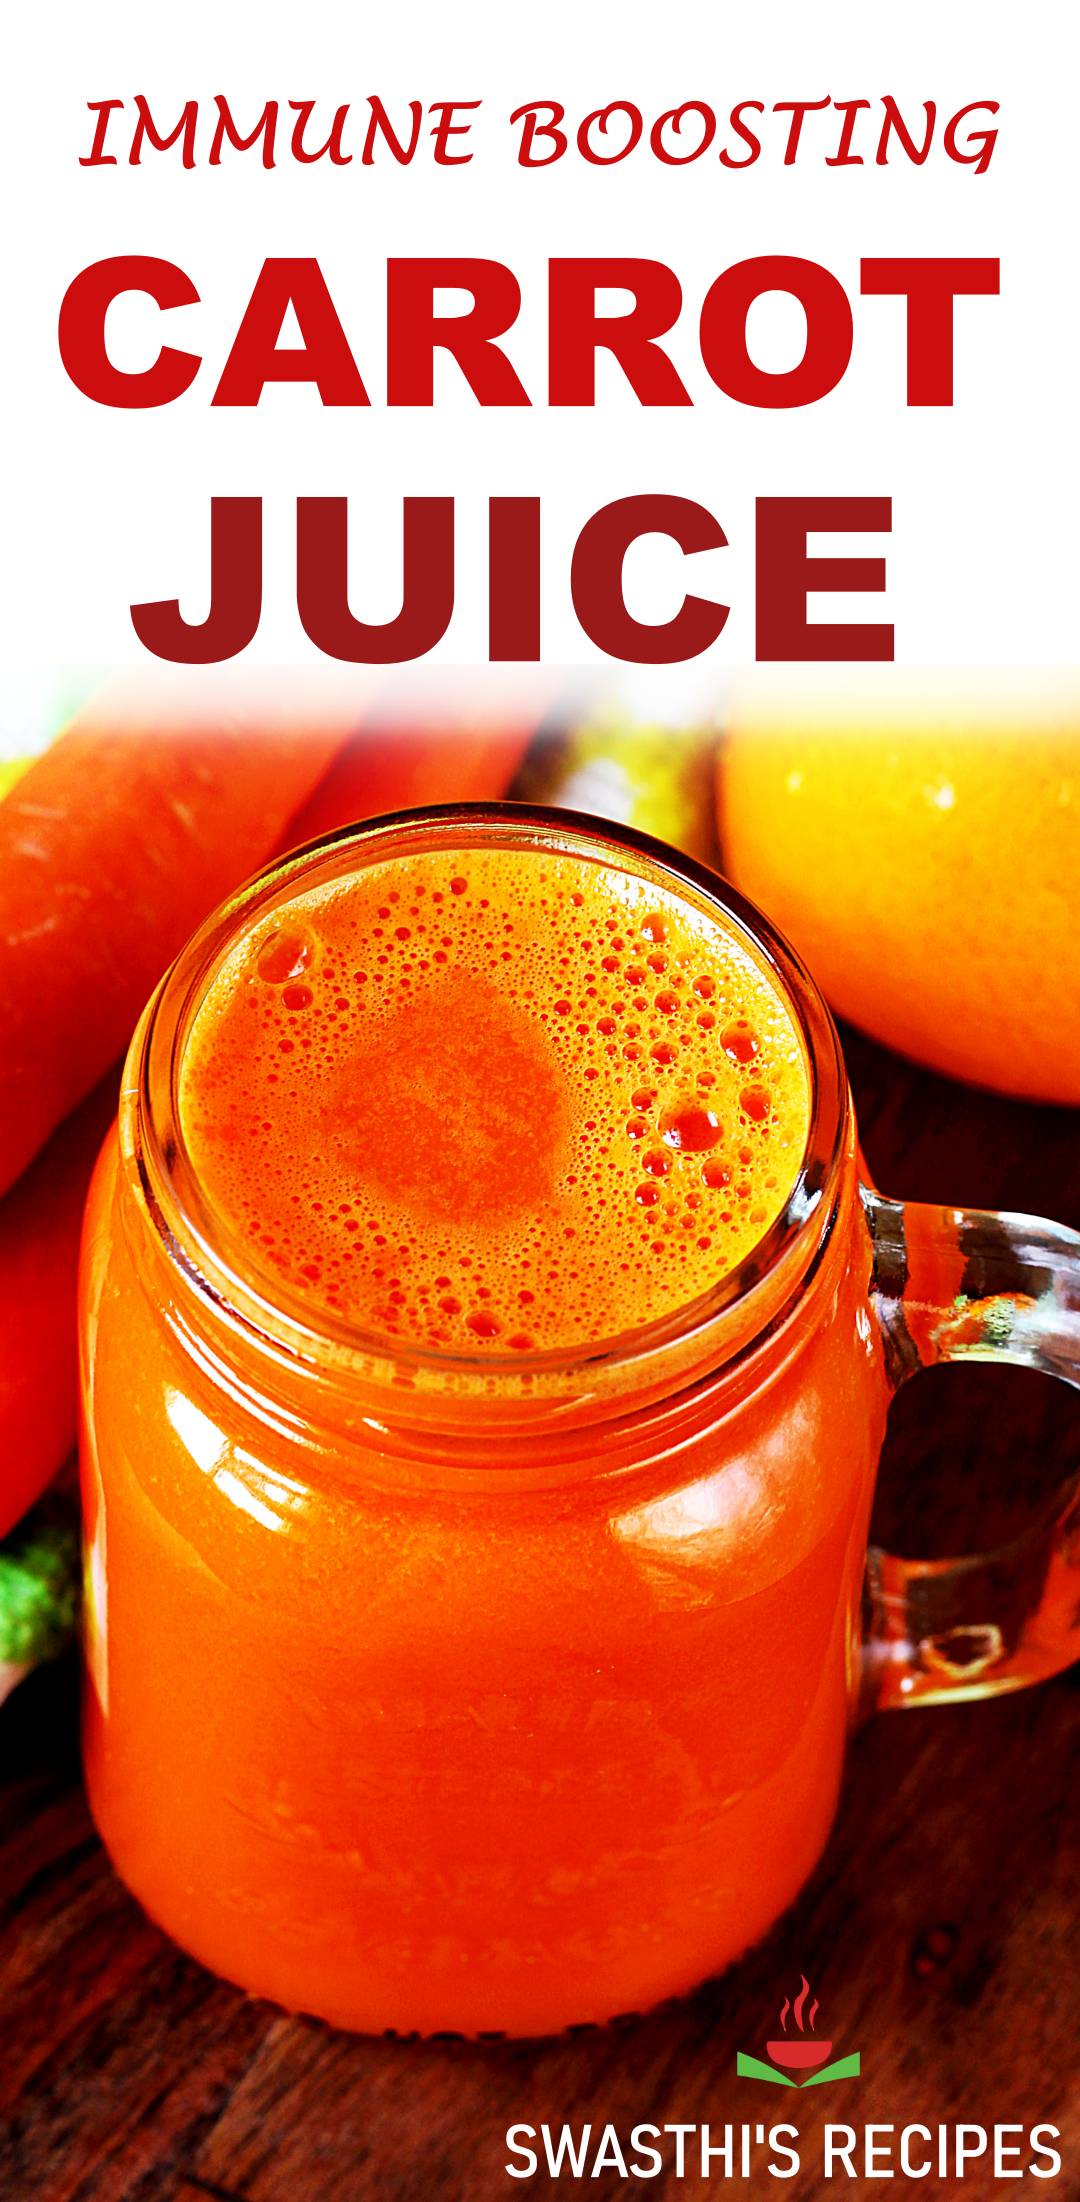 Carrot juice recipe | How to make carrot juice - Swasthi's Recipes